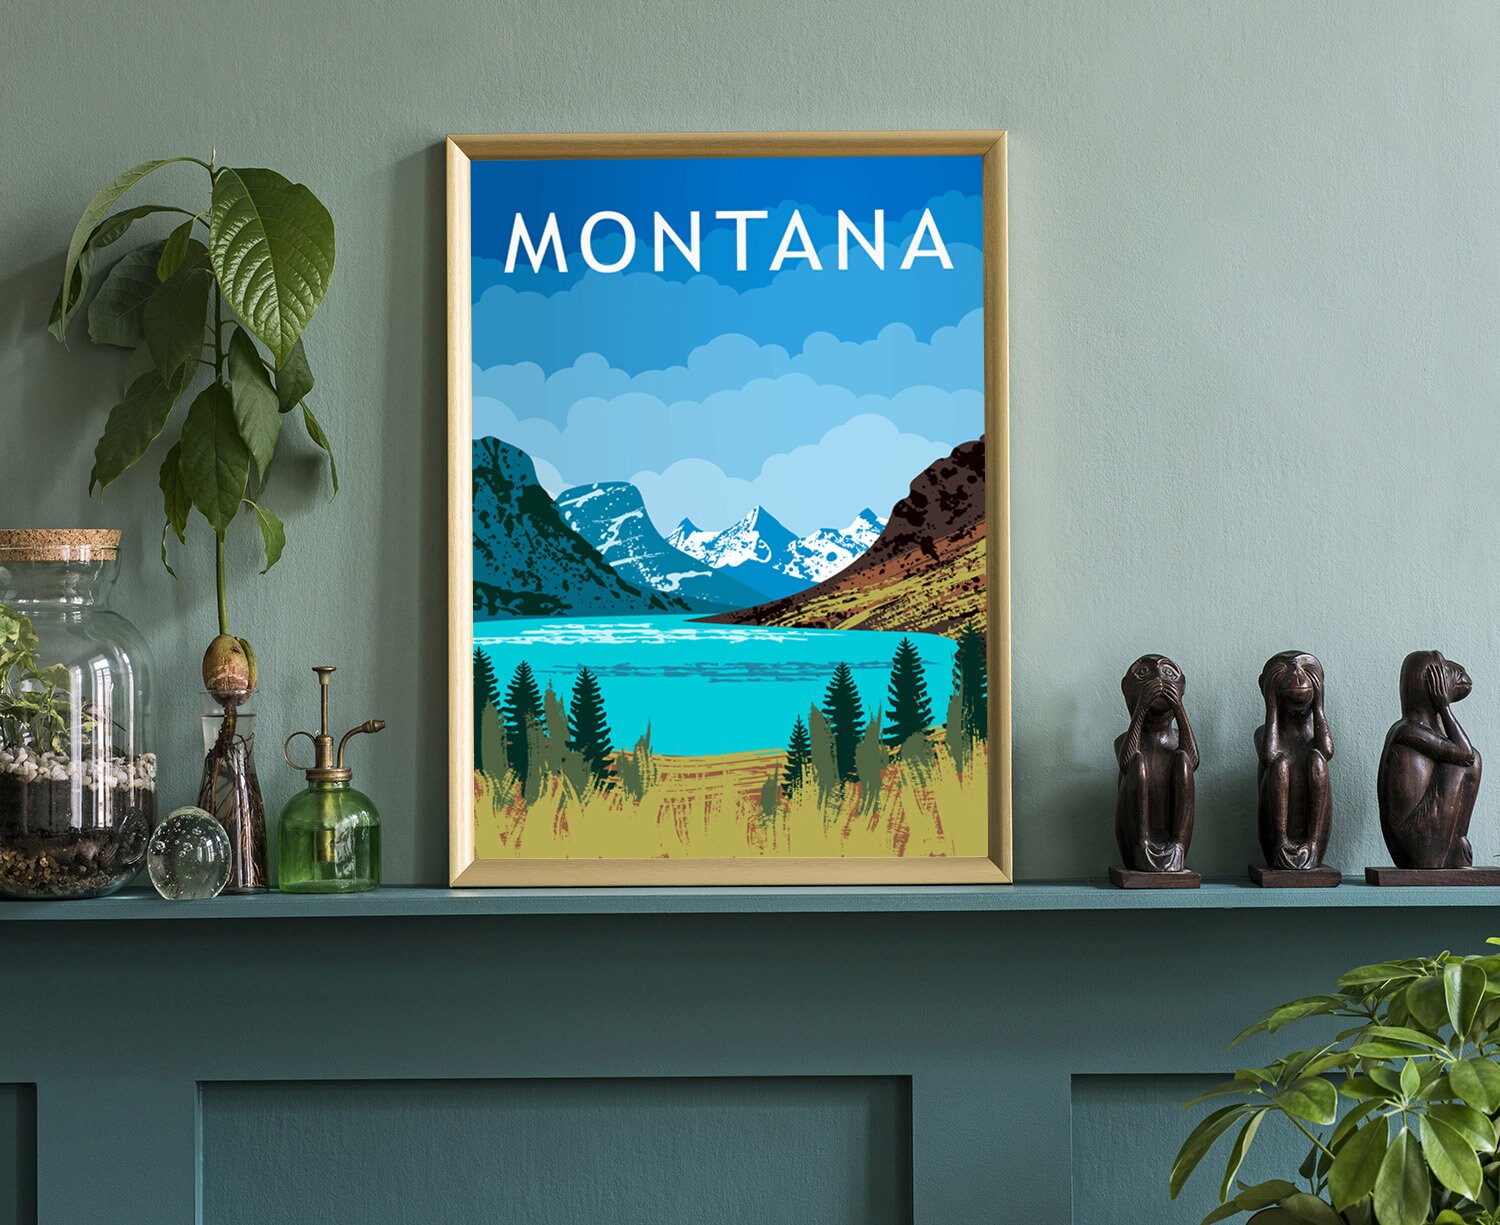 Retro Style Travel Poster, Montana Vintage Rustic Poster Print, Home Wall Art, Office Wall Decoration, Posters, Montana, State Map Poster